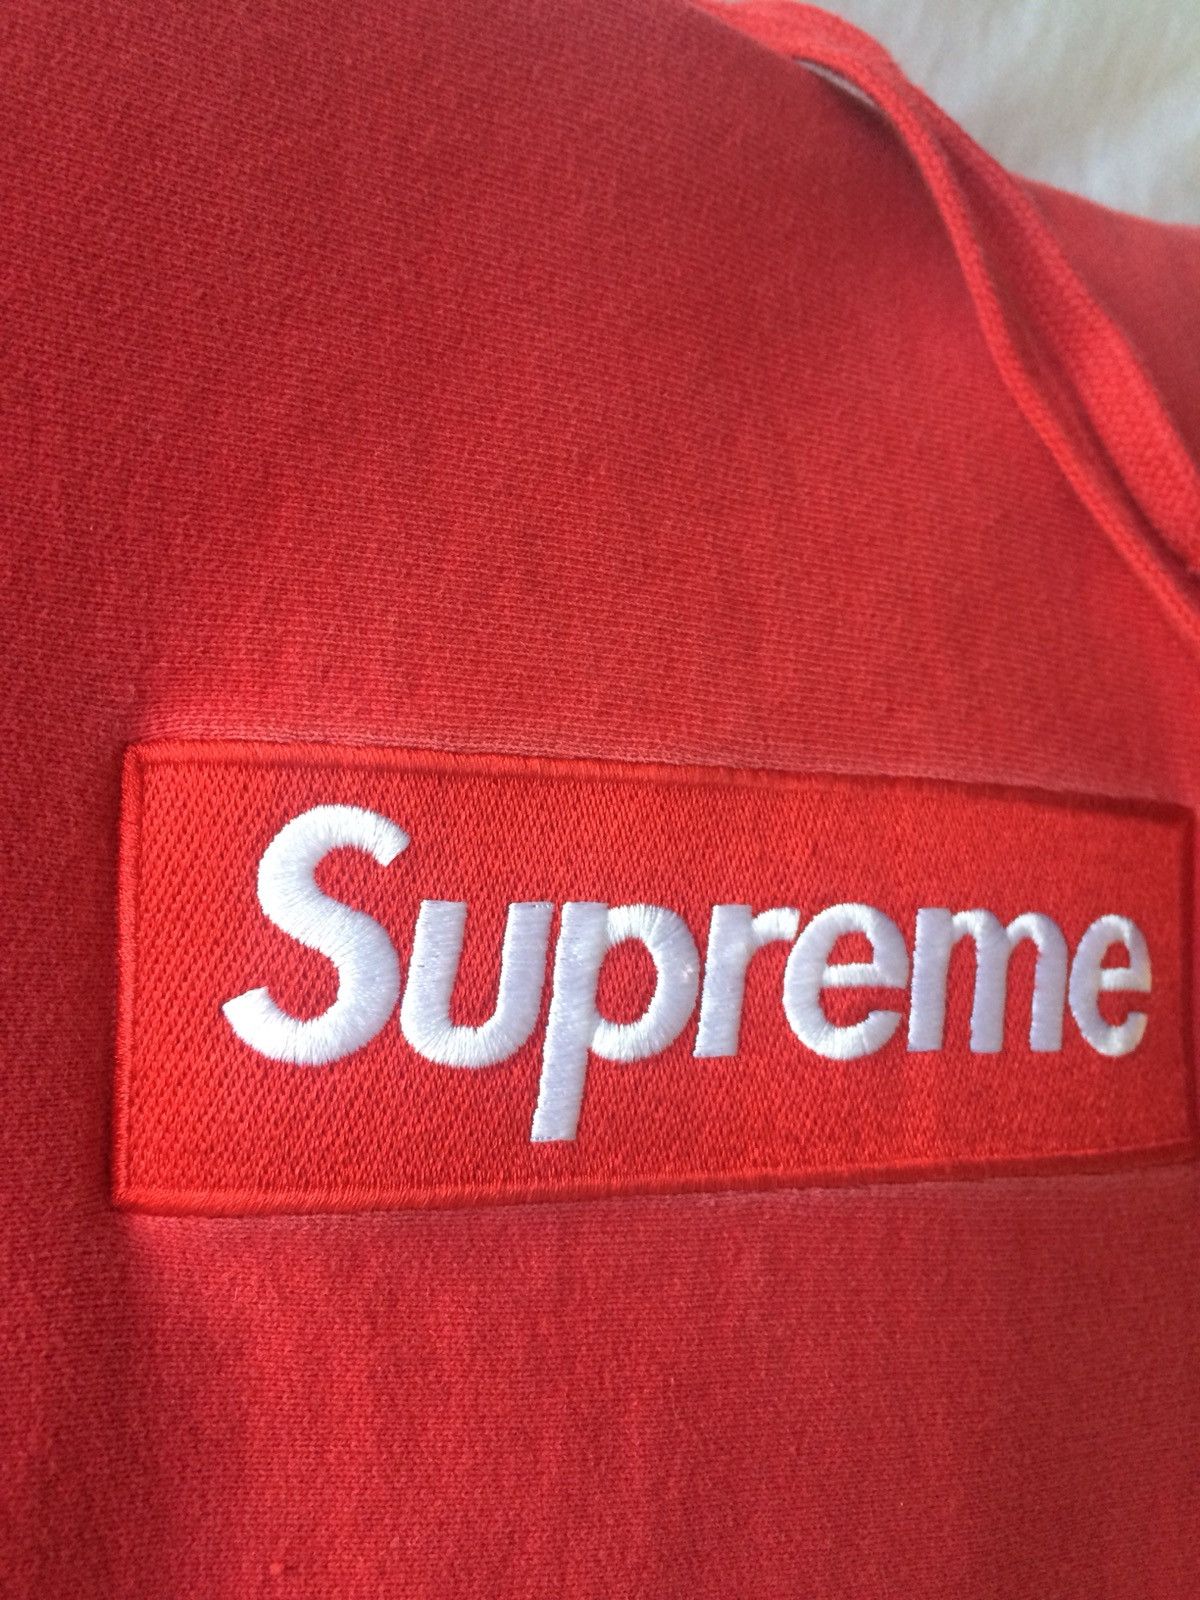 Supreme Red On Red Box Logo Hoodie Size US L / EU 52-54 / 3 - 2 Preview